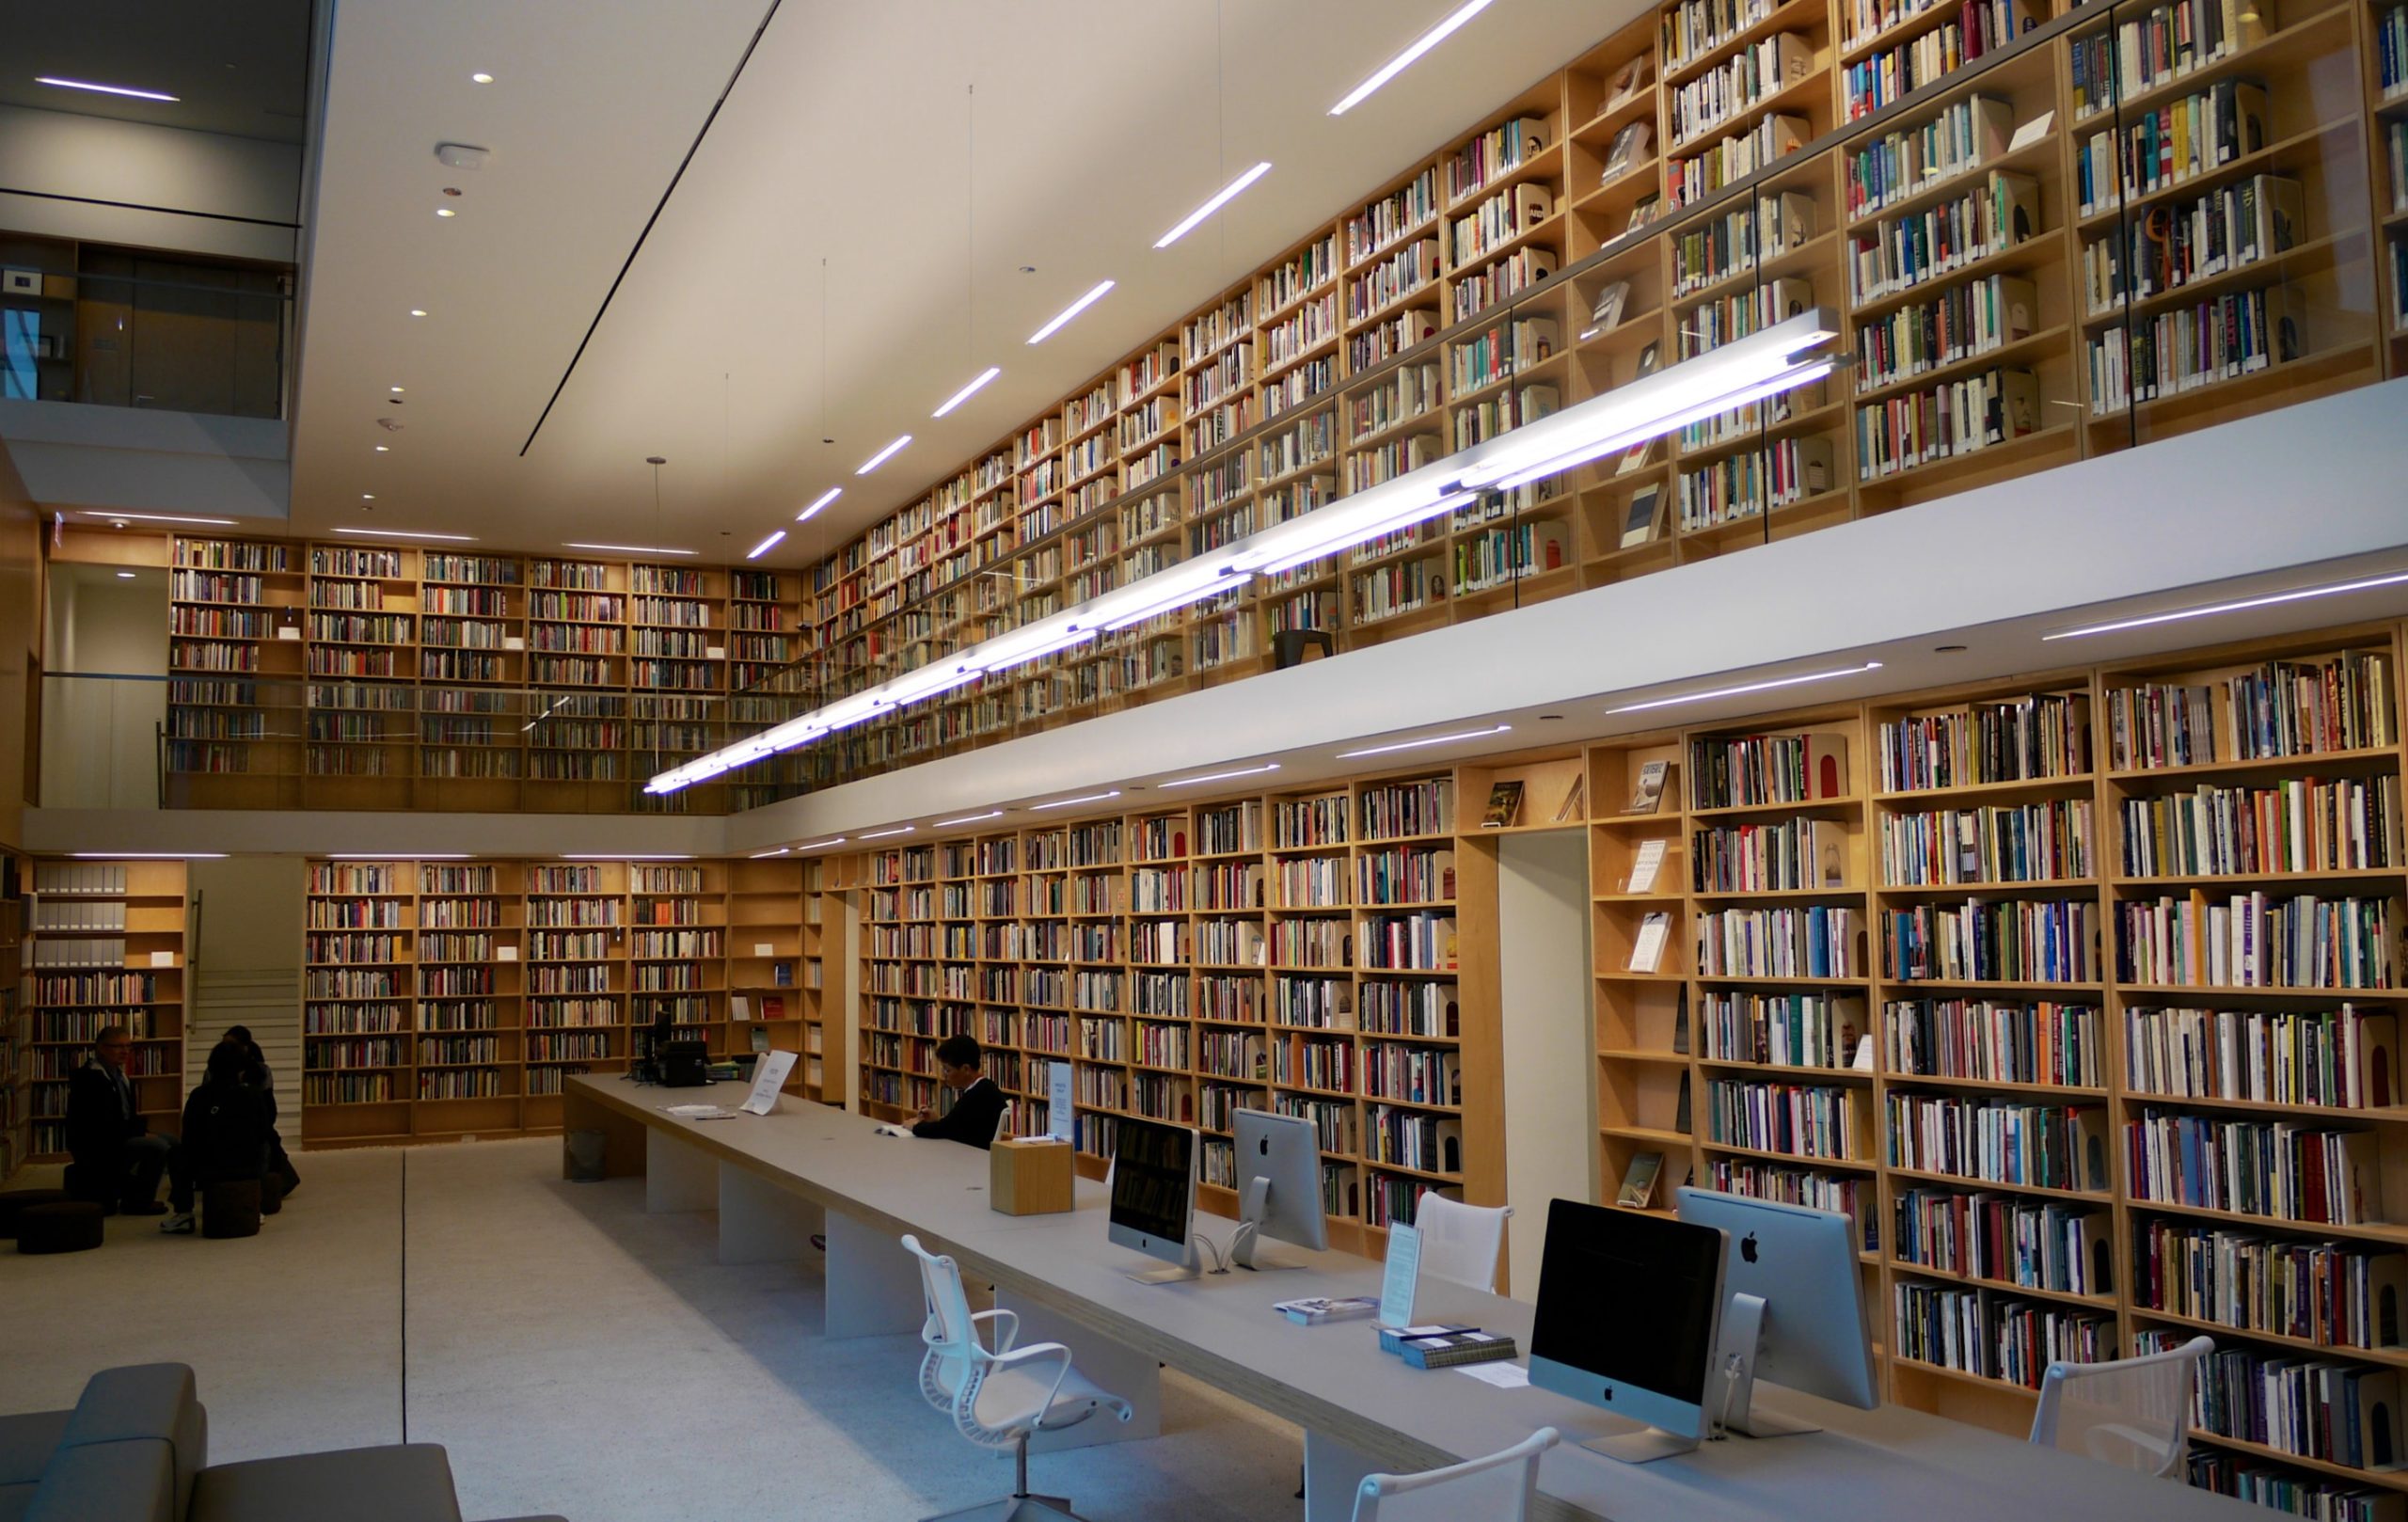 The Poetry Foundation's interior lined with bookshelves.